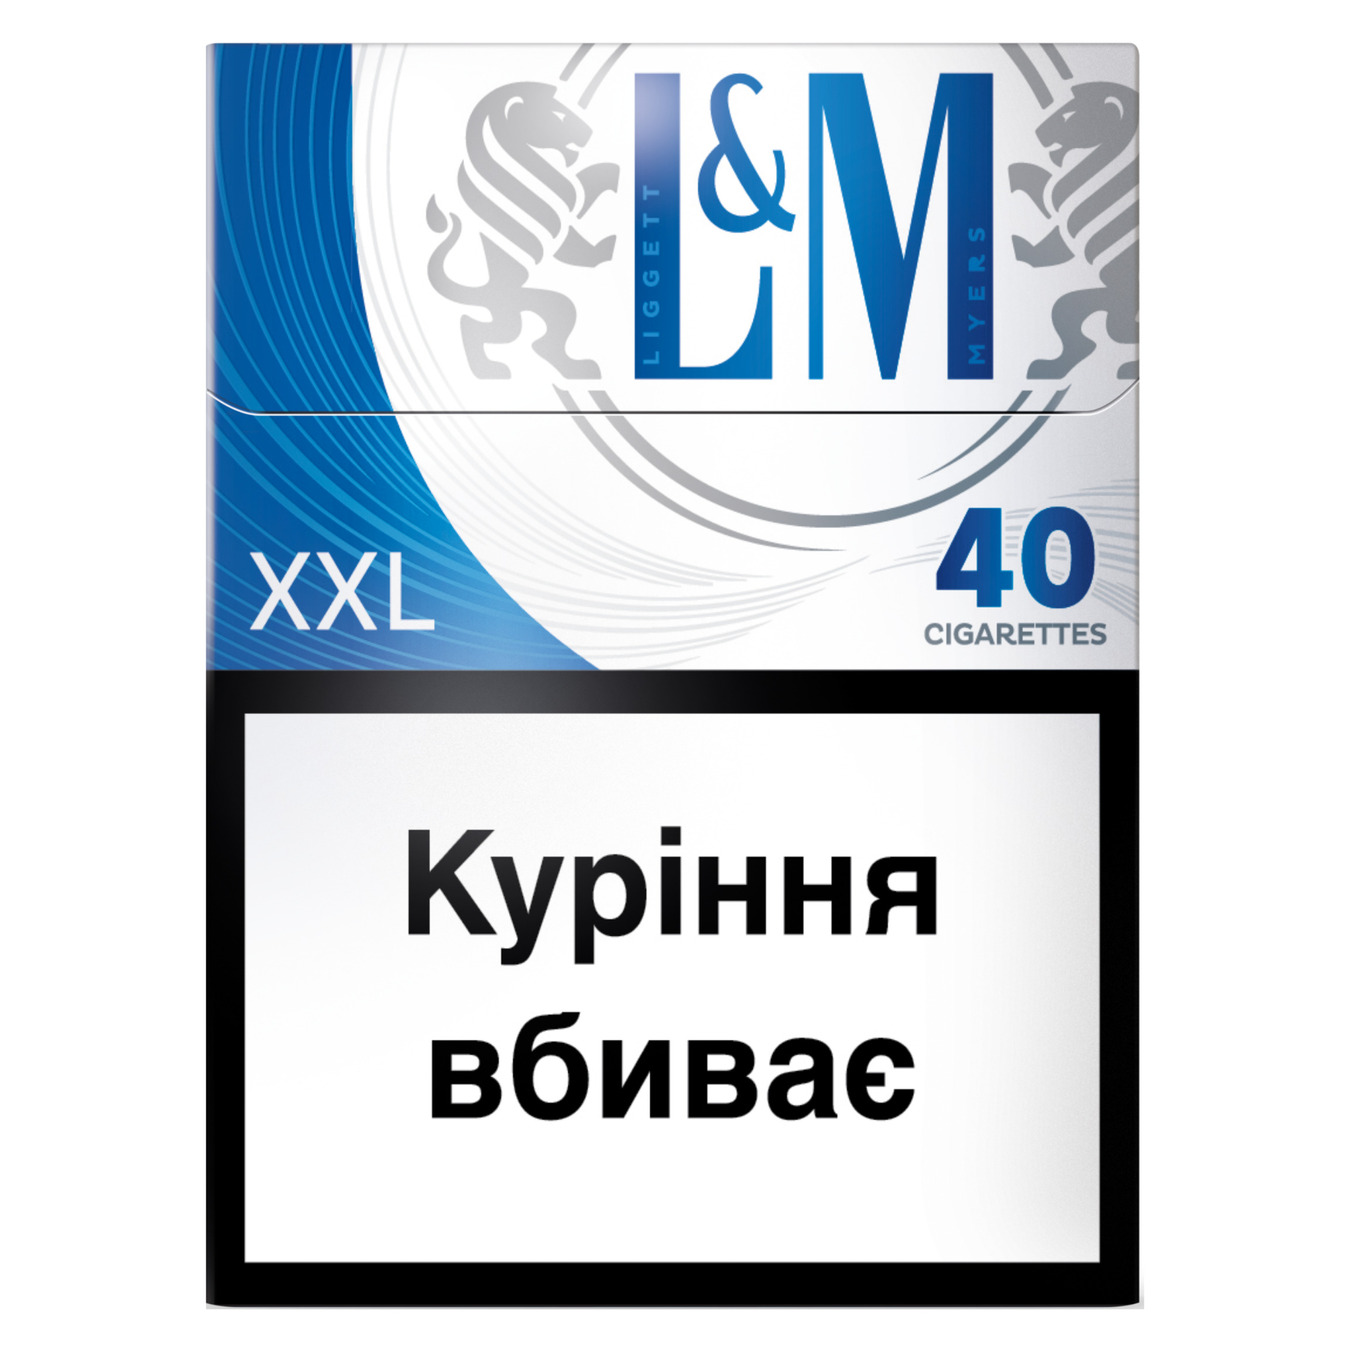 Cigarettes L&M Blue Label 40pcs (the price is indicated without excise tax)